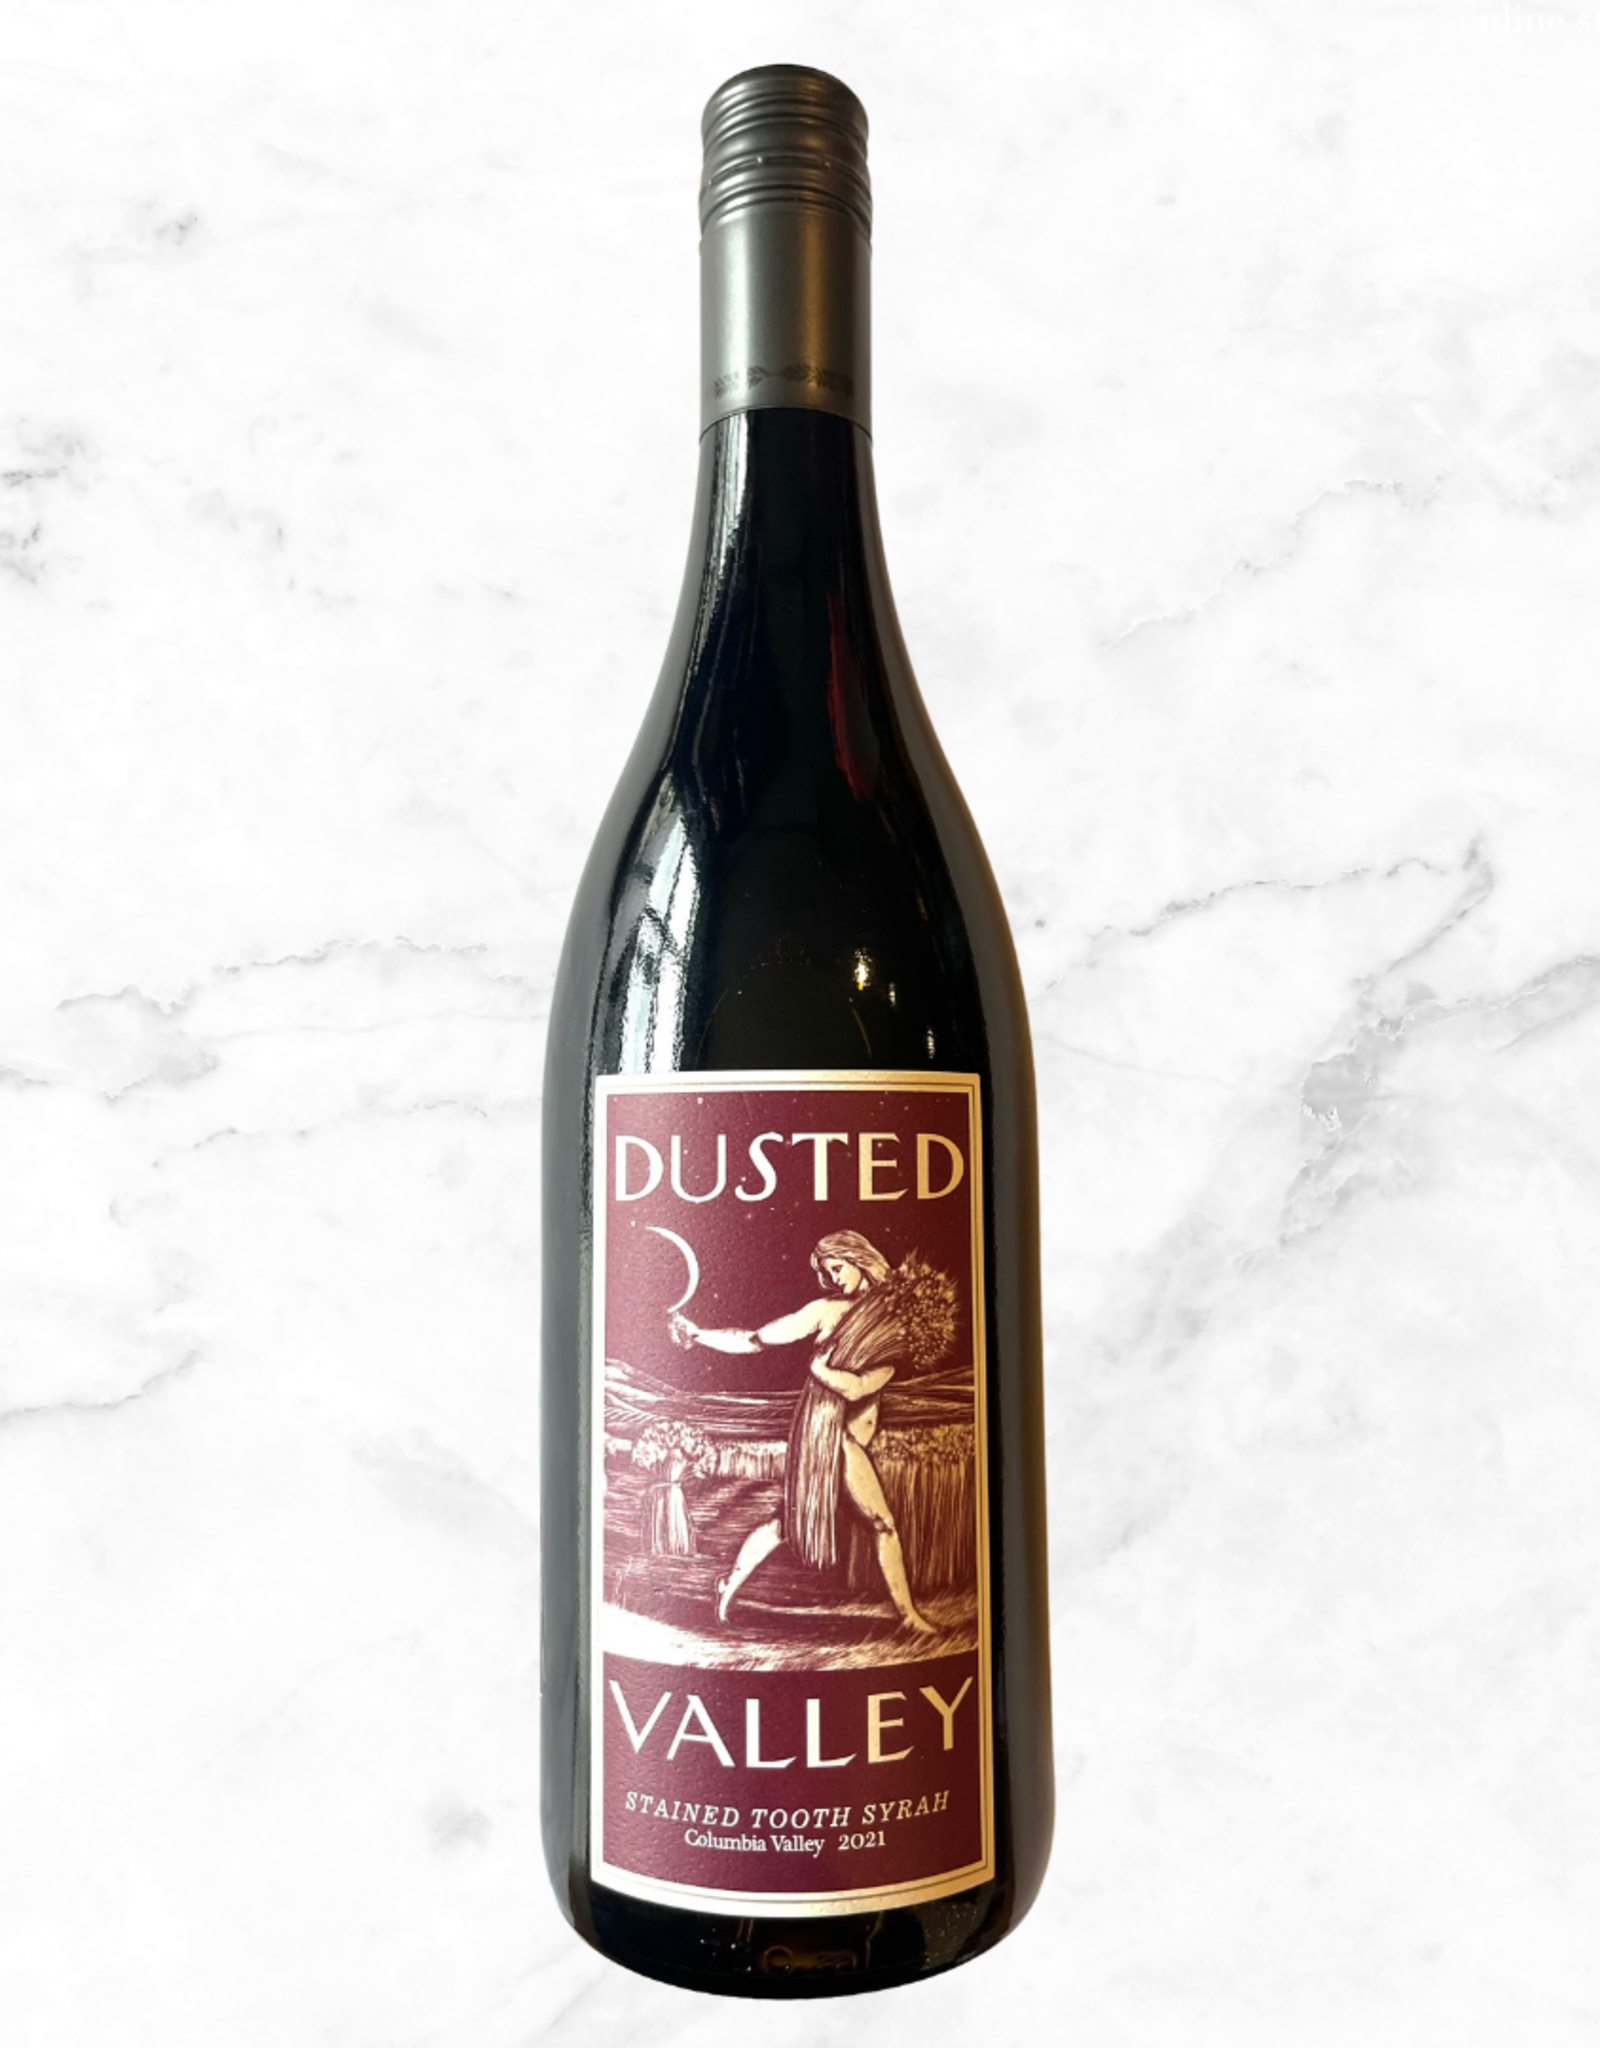 Dusted Valley Stained Tooth Syrah